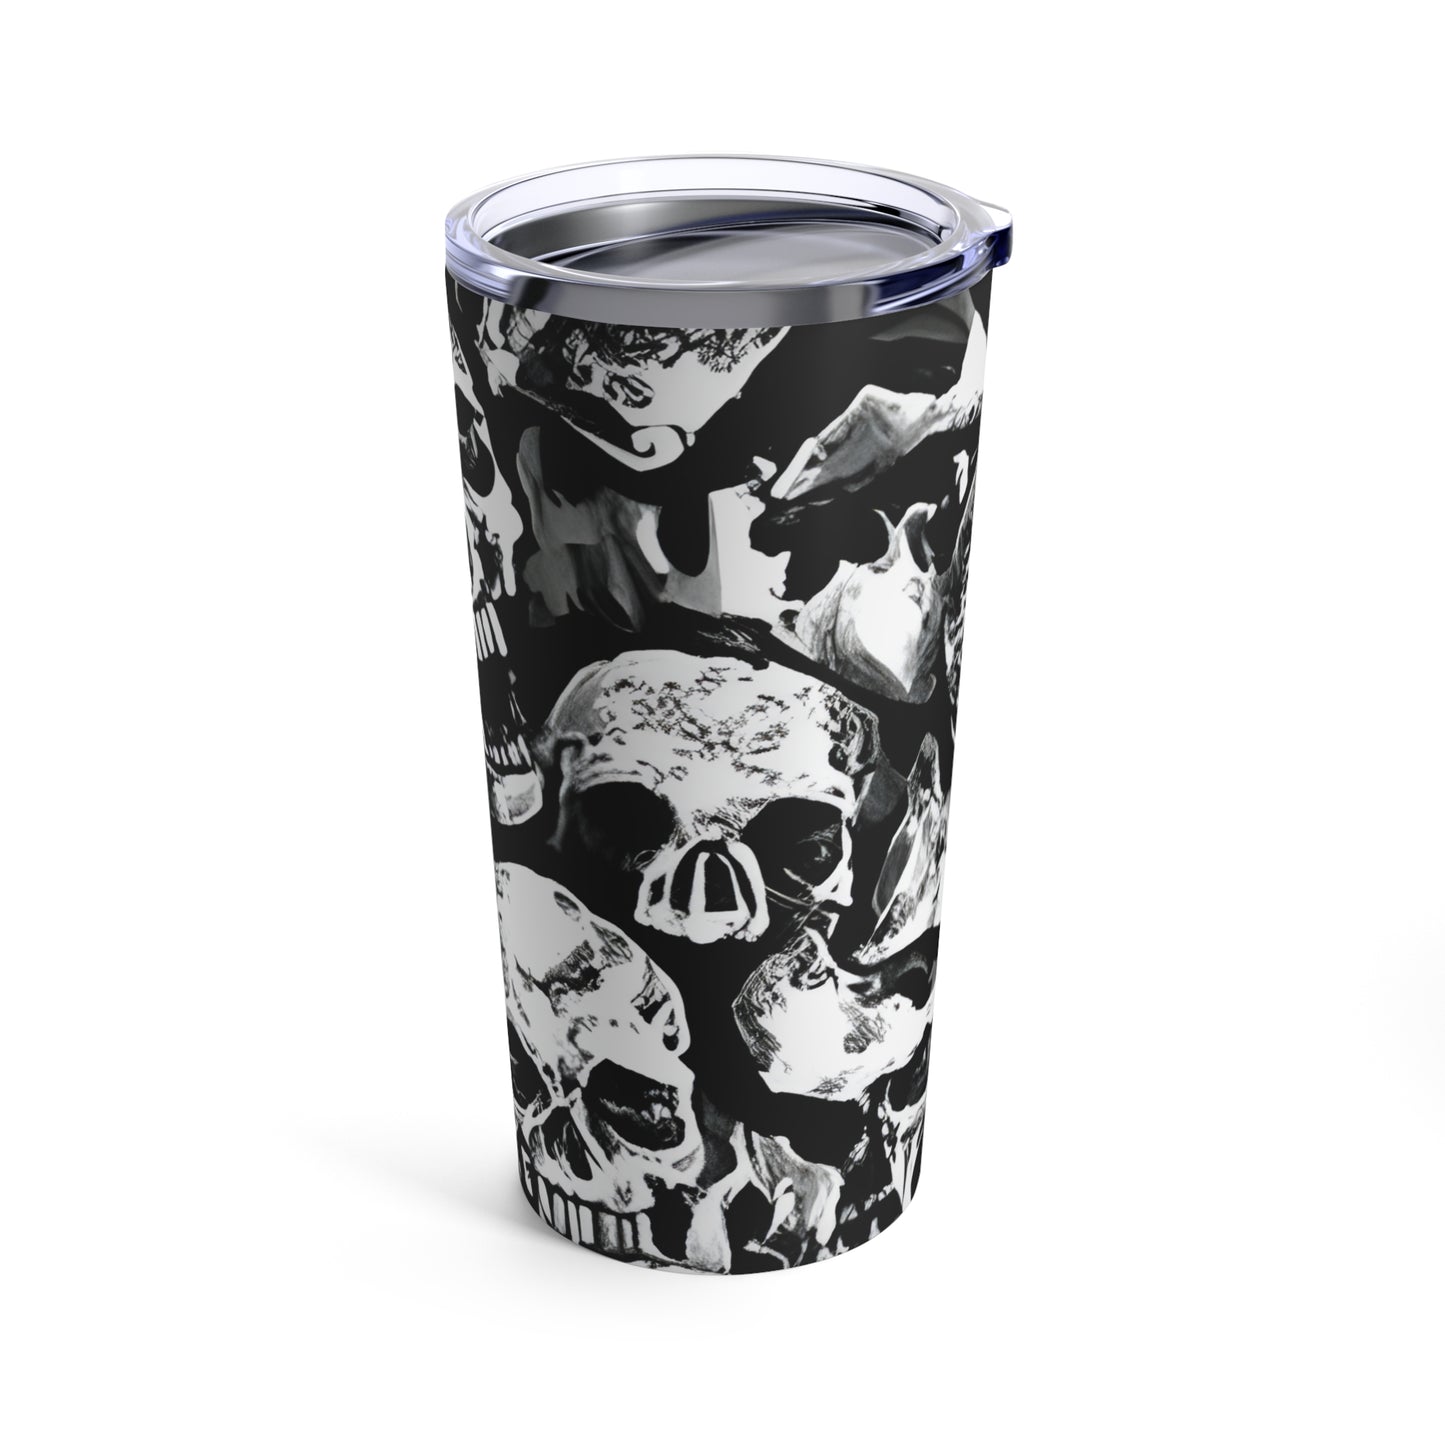 Skull Pile Tumbler 20oz Stainless Steel, Plastic and Rubber Lid, Glossy Finish